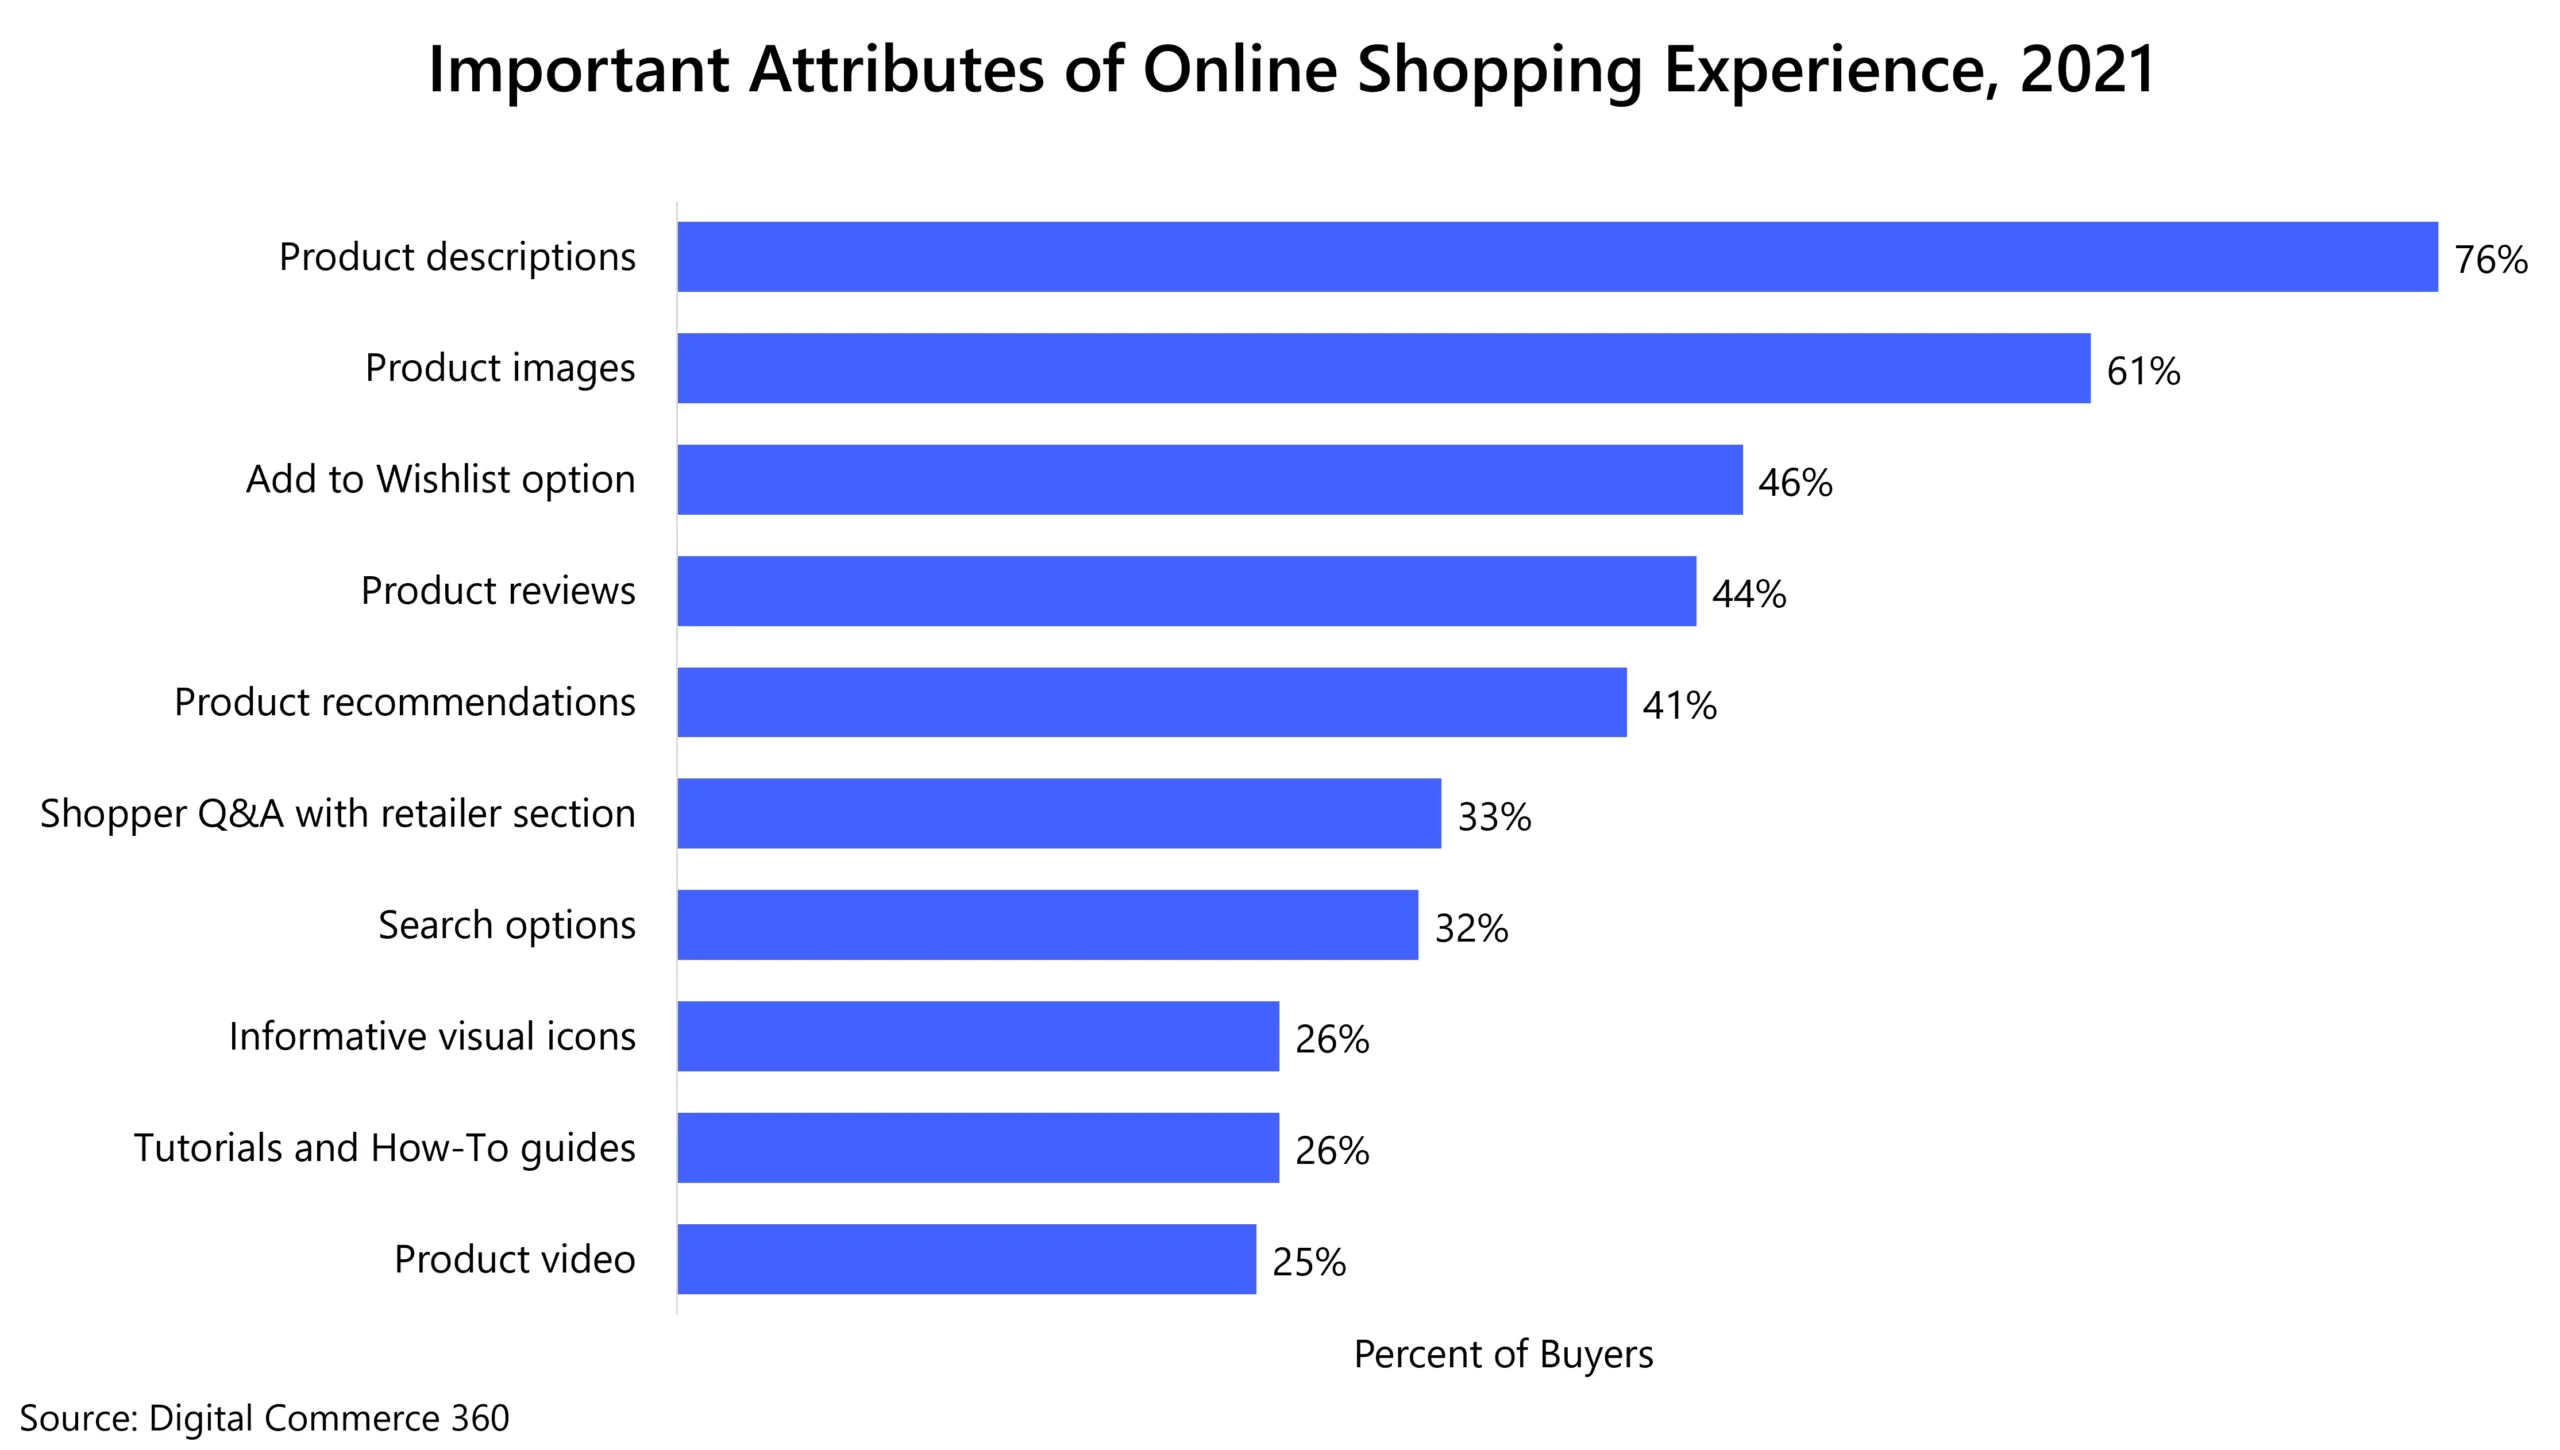 chart showing important attributes of online shopping experience in 2021